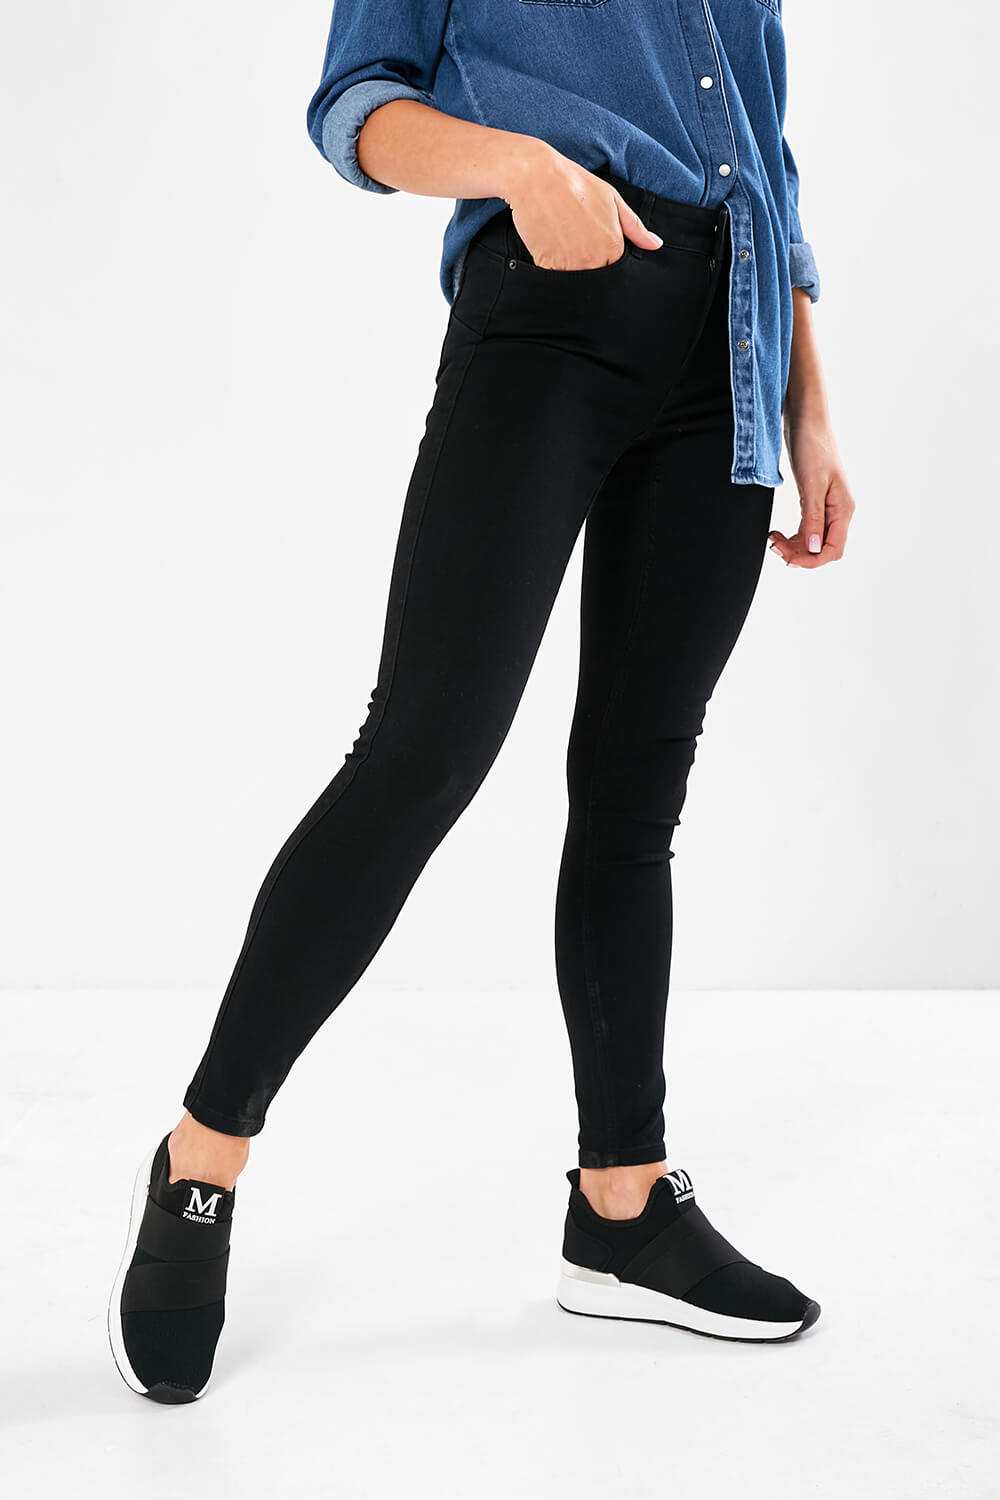 Vero Seven Shape Up Jeans in Black | iCLOTHING